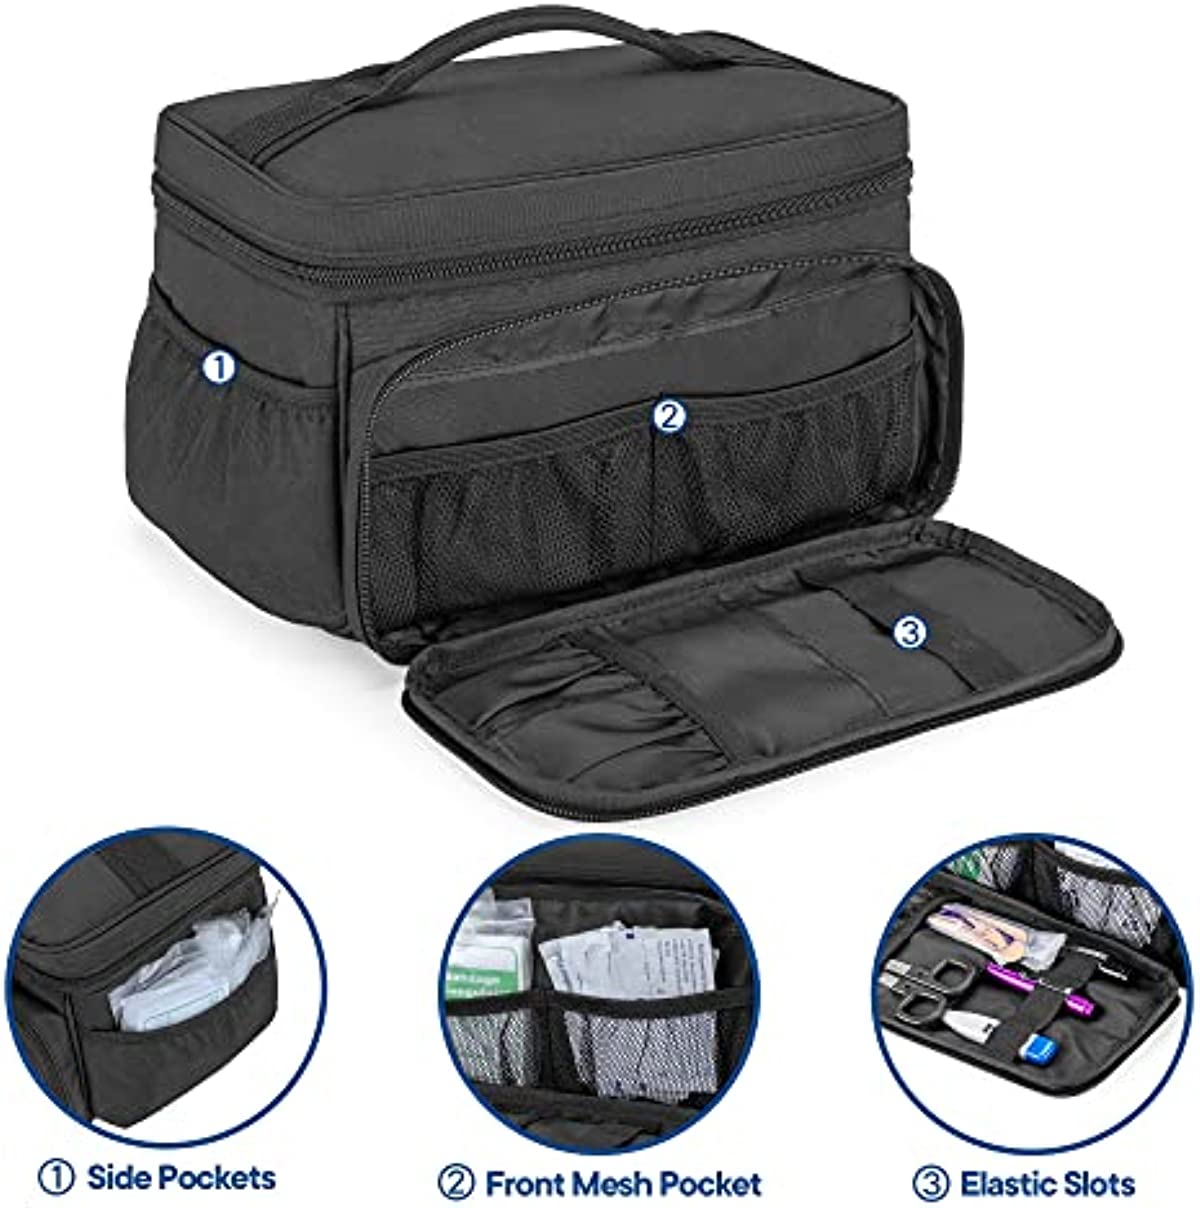 Damero Small Medicine Storage Bag Empty, Emergency Trauma Kit Organizer Bag Family First Aid Box for Hiking, Camping and Home - No Accessories Included